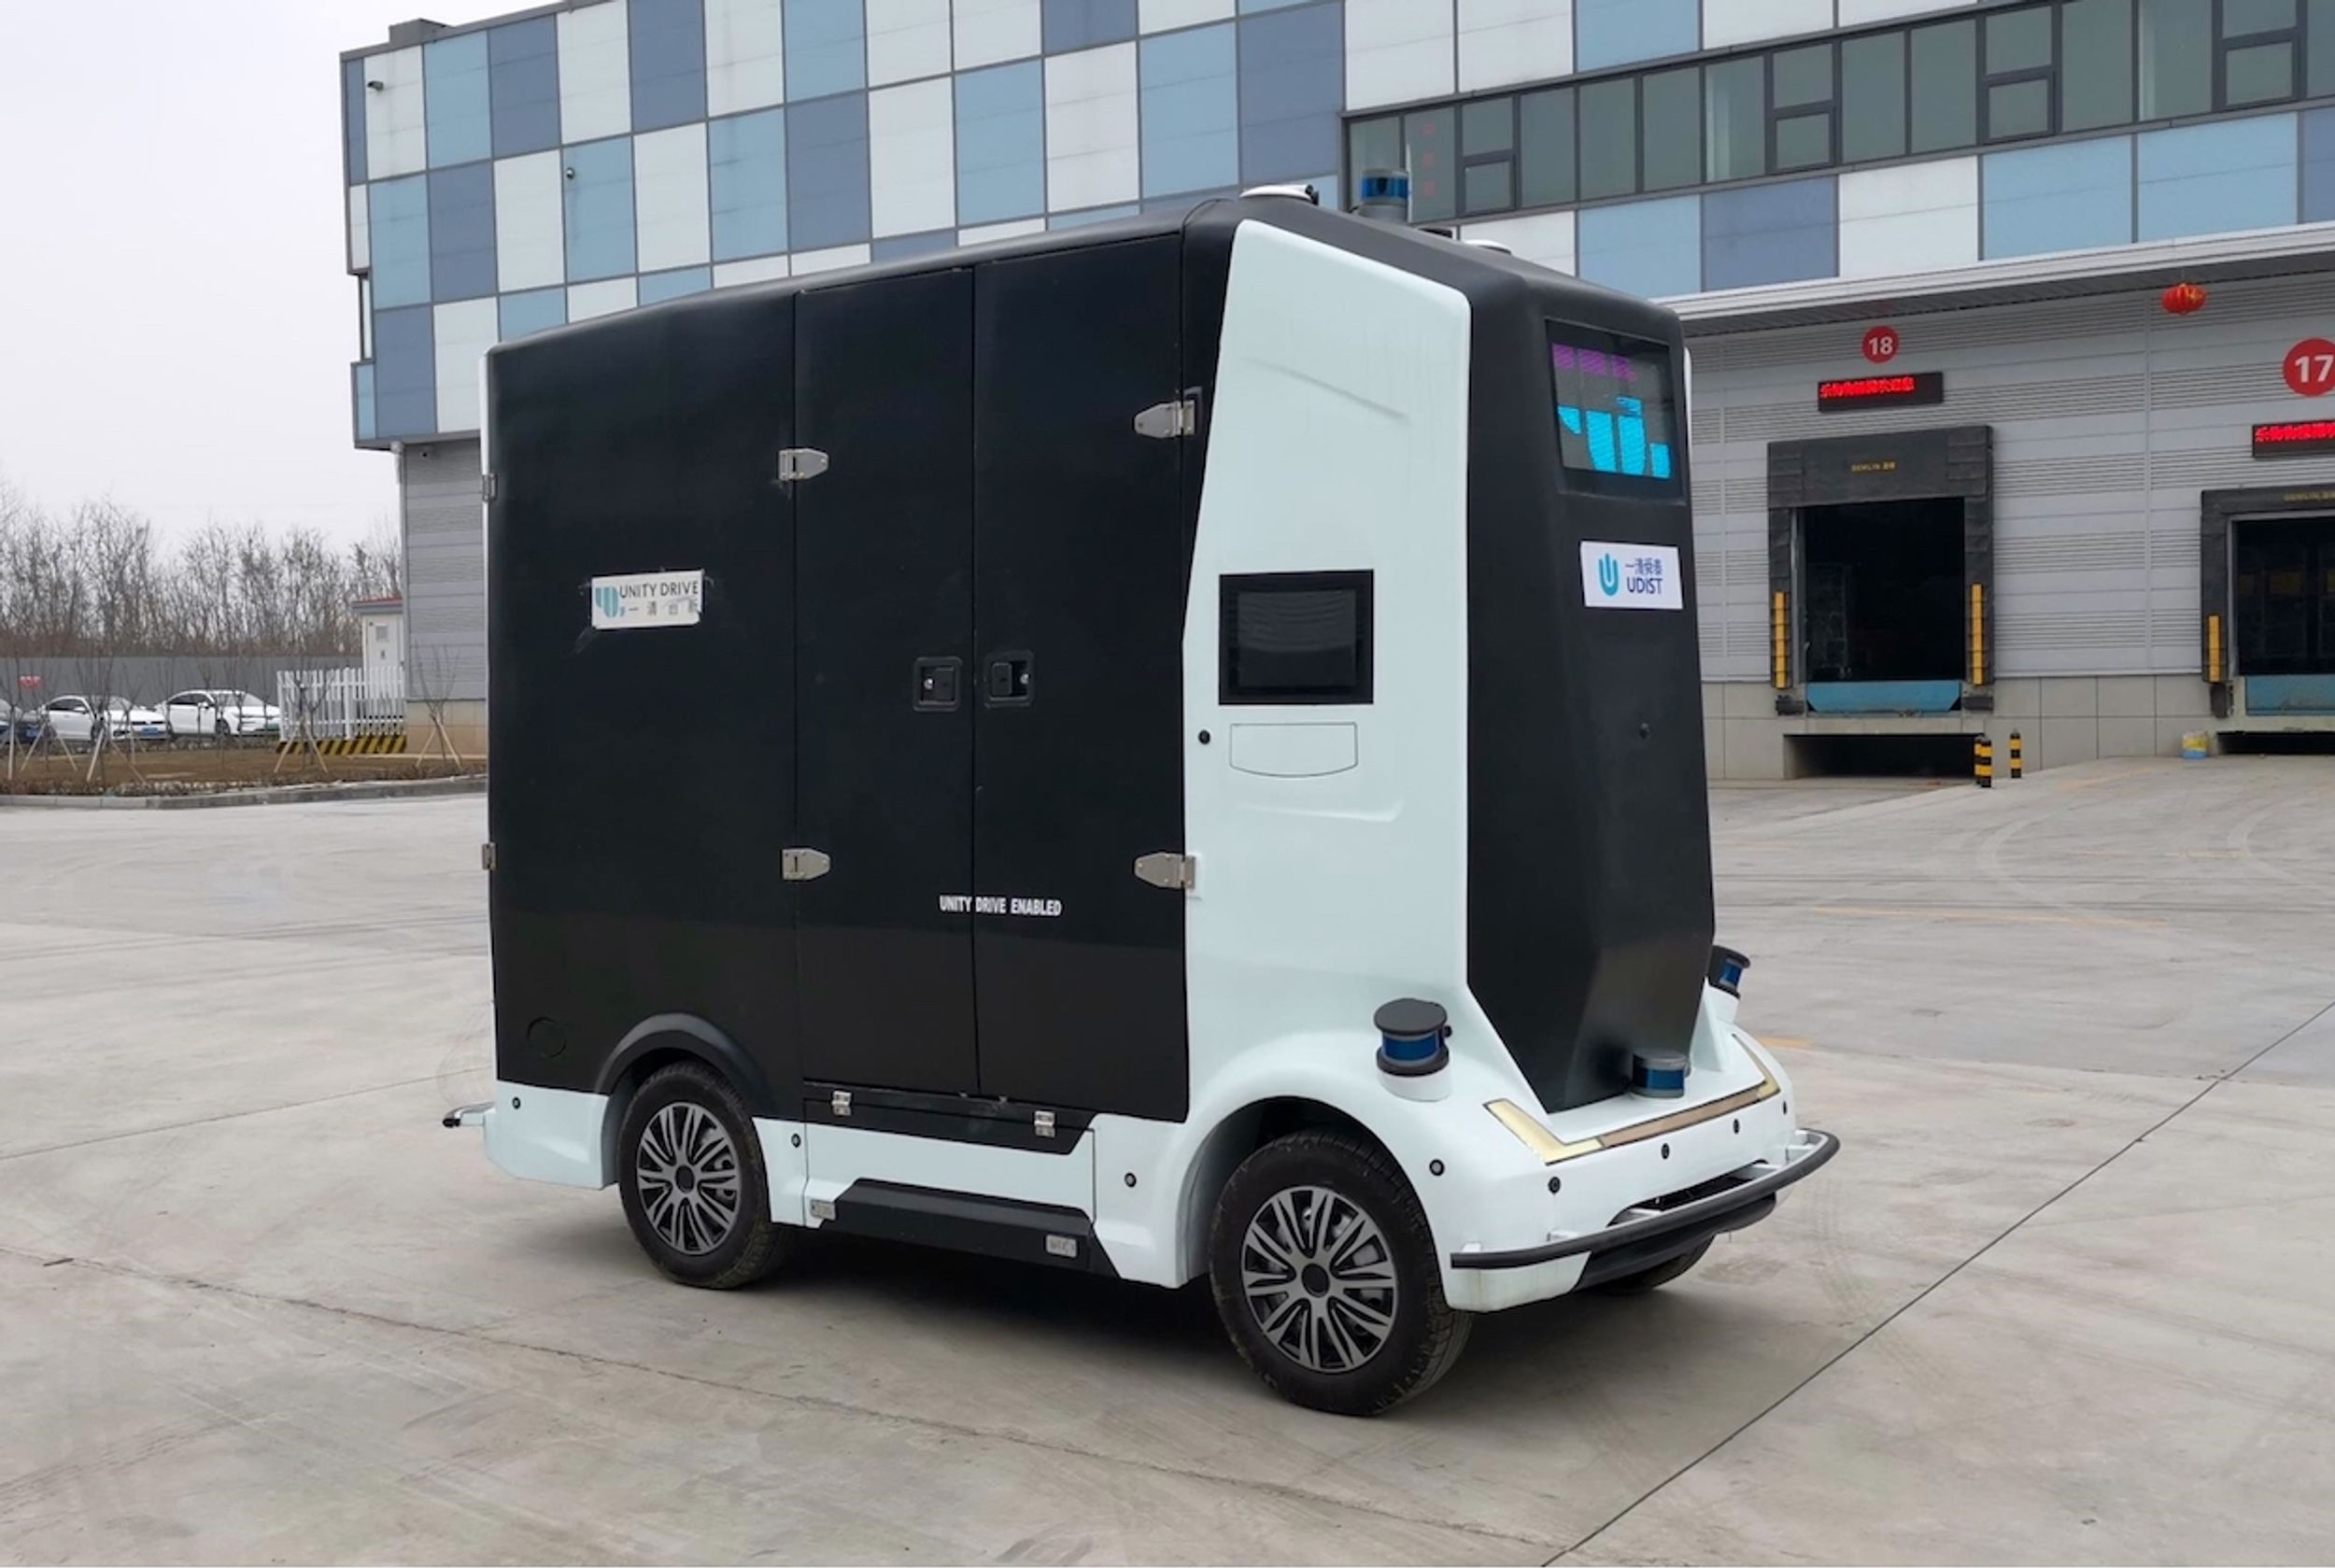 Self-driving delivery vehicle developed by Unity Drive Innovation (UDI)